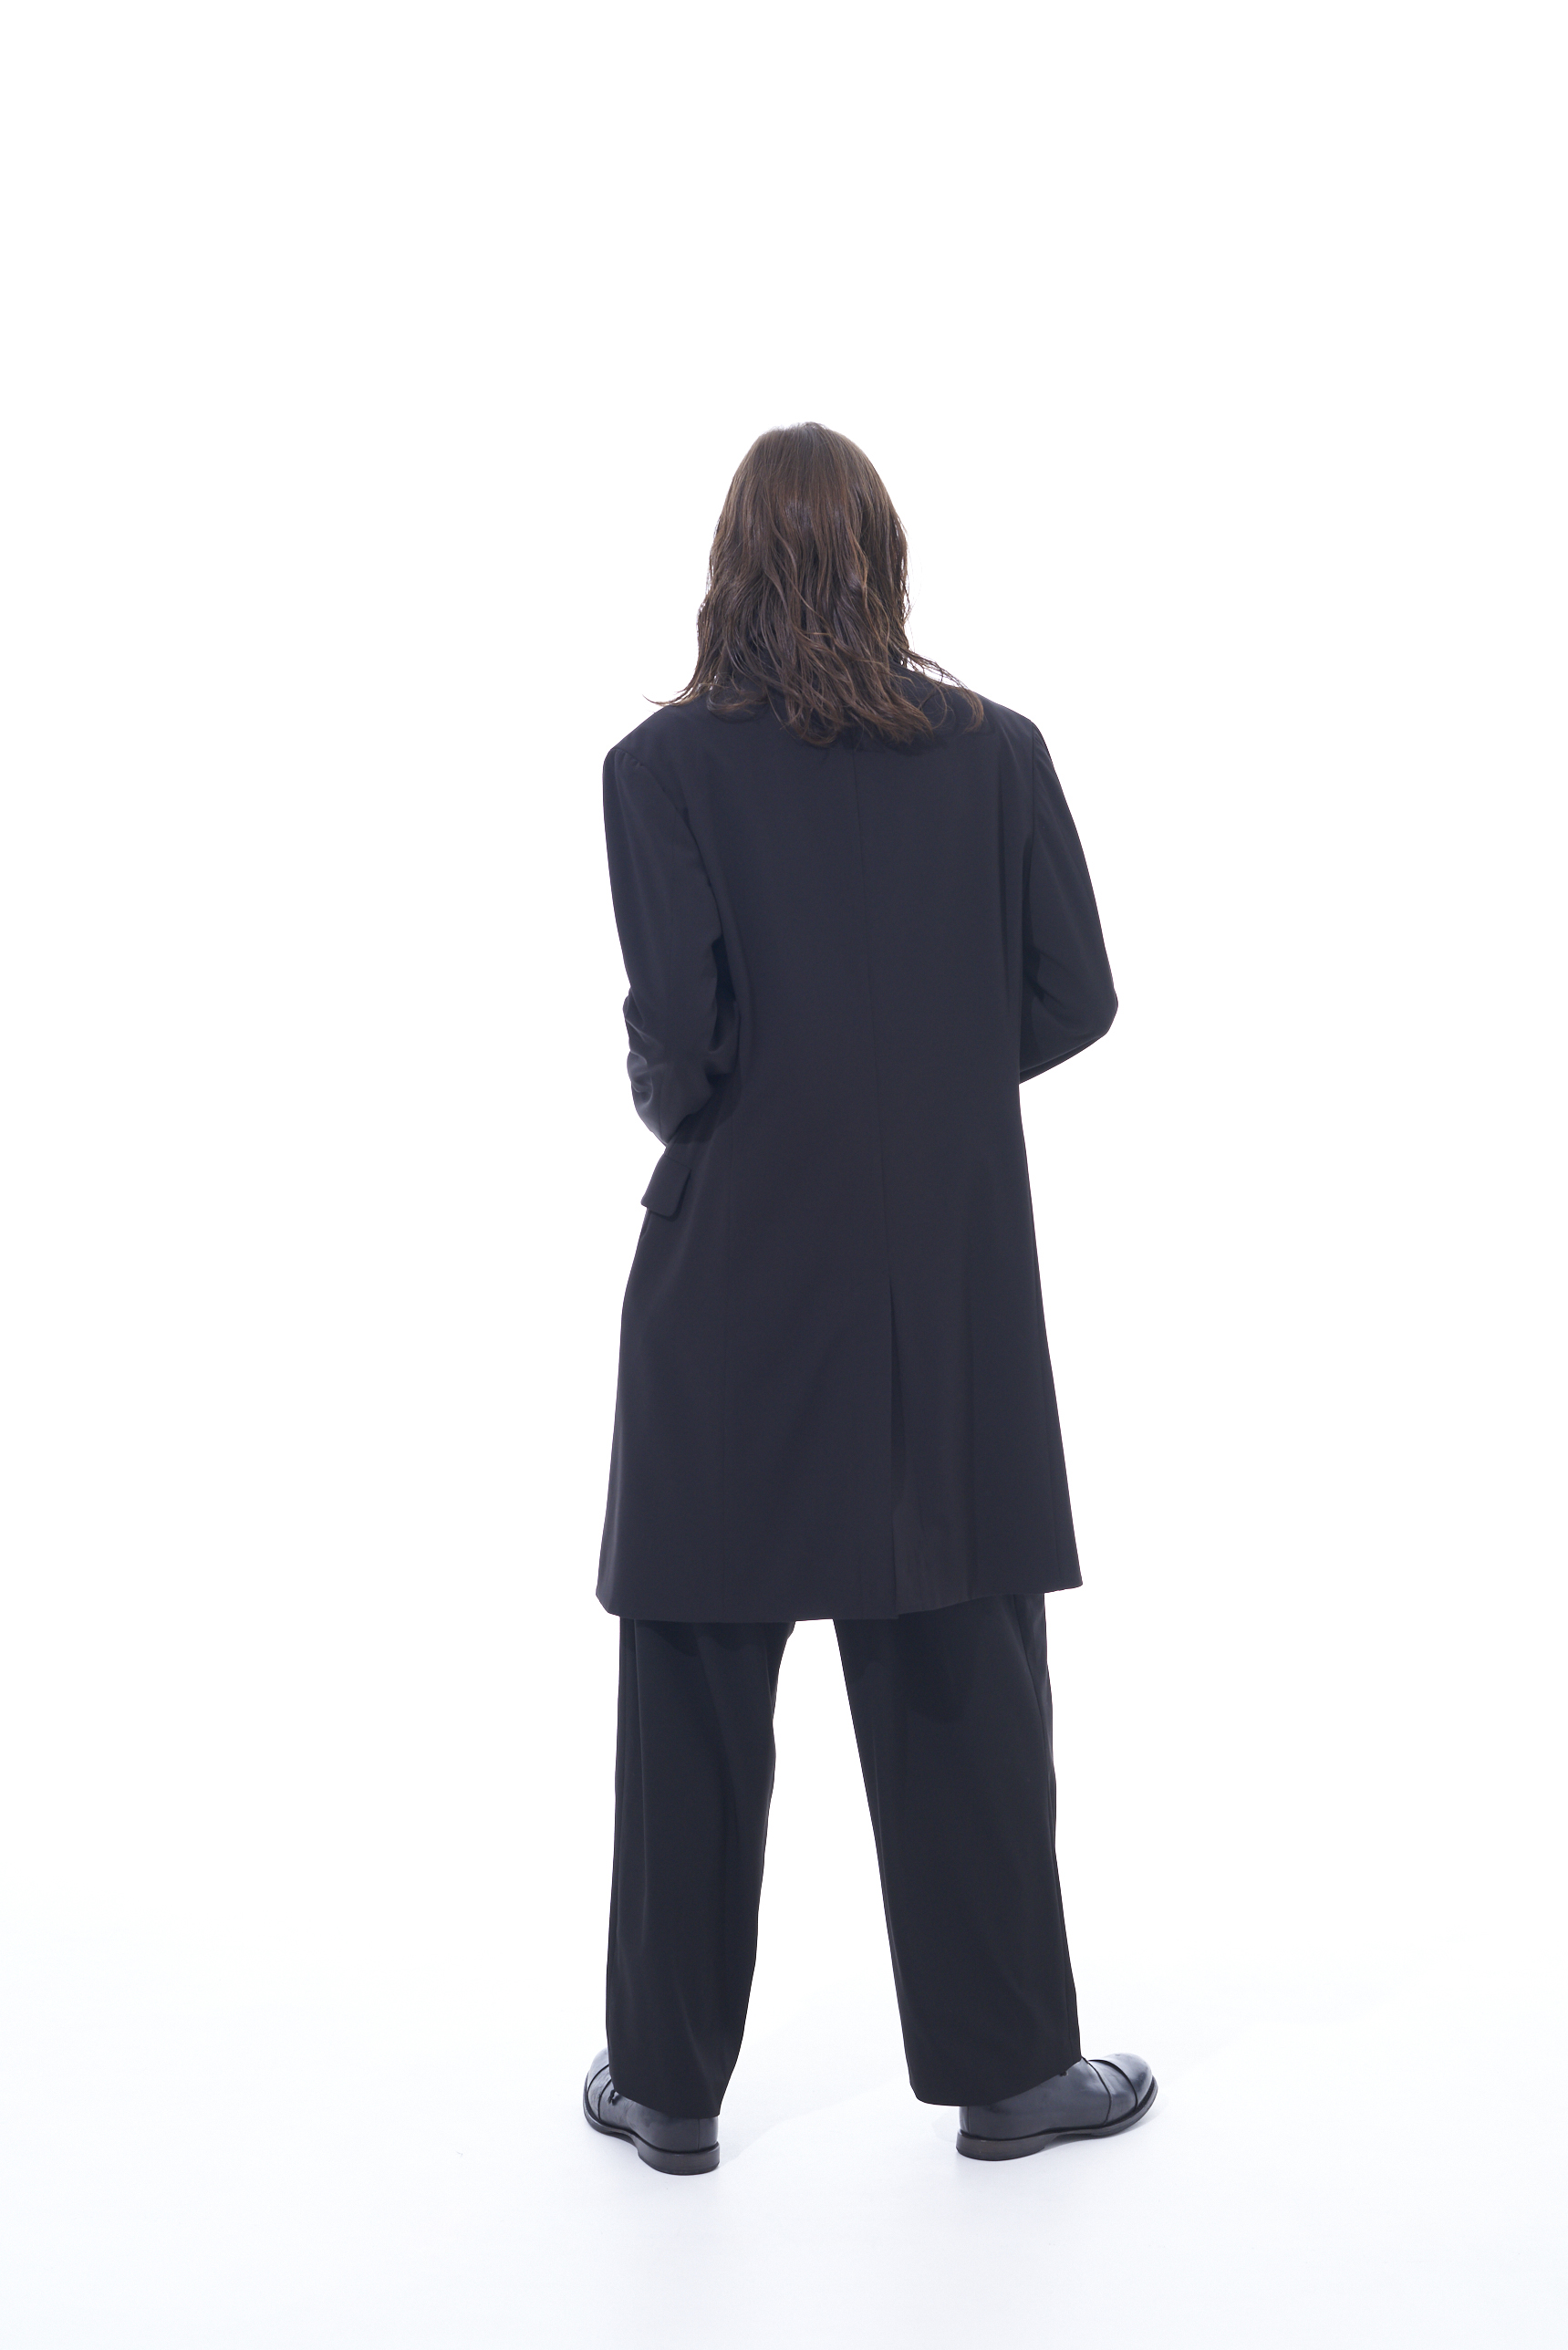 PE/RAYON GABARDINE STRETCH 2 TUCK TAPERED WIDE PANTS WITH A BUTTON SLIT AT THE HEM